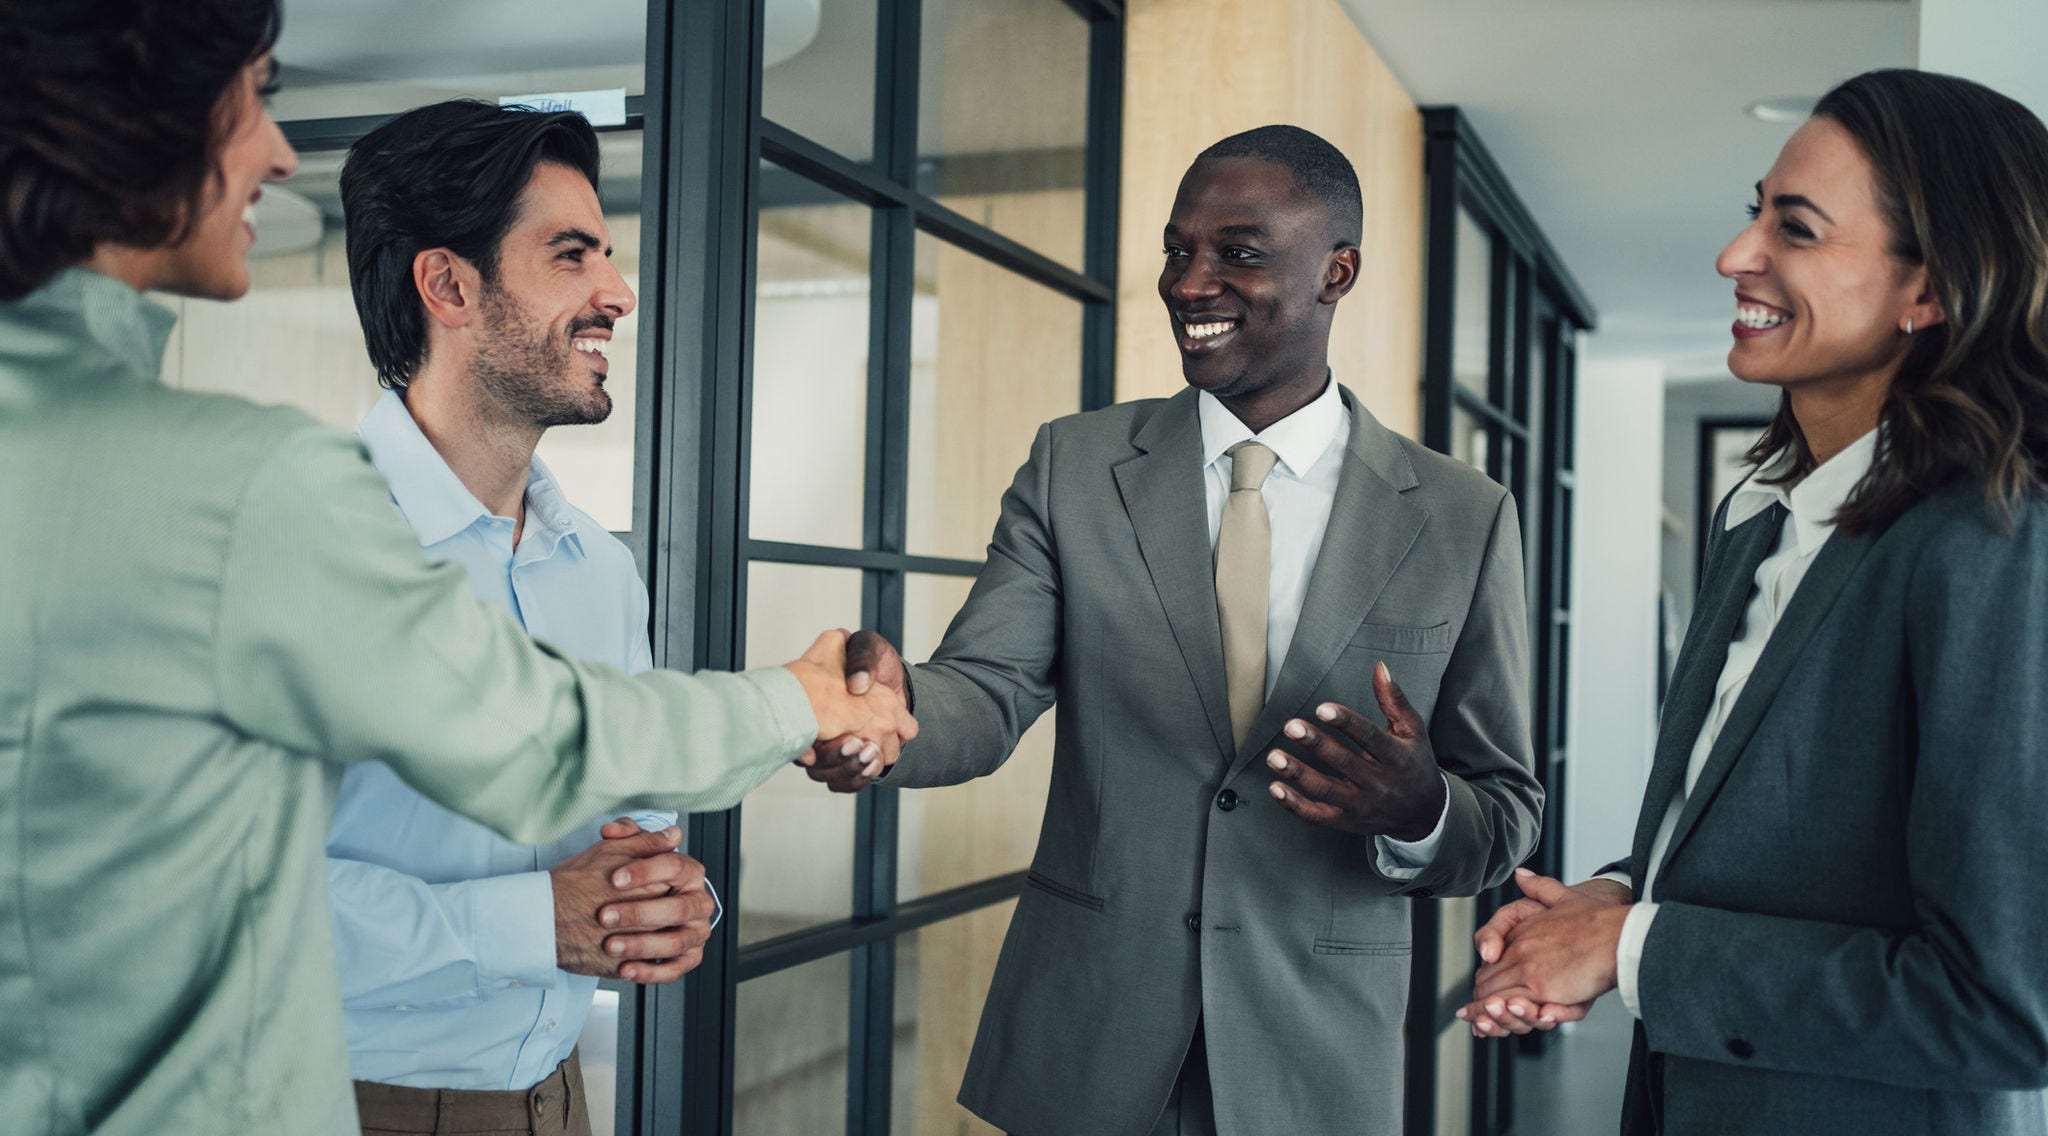 colleagues welcoming new coworker shaking hands and smiling